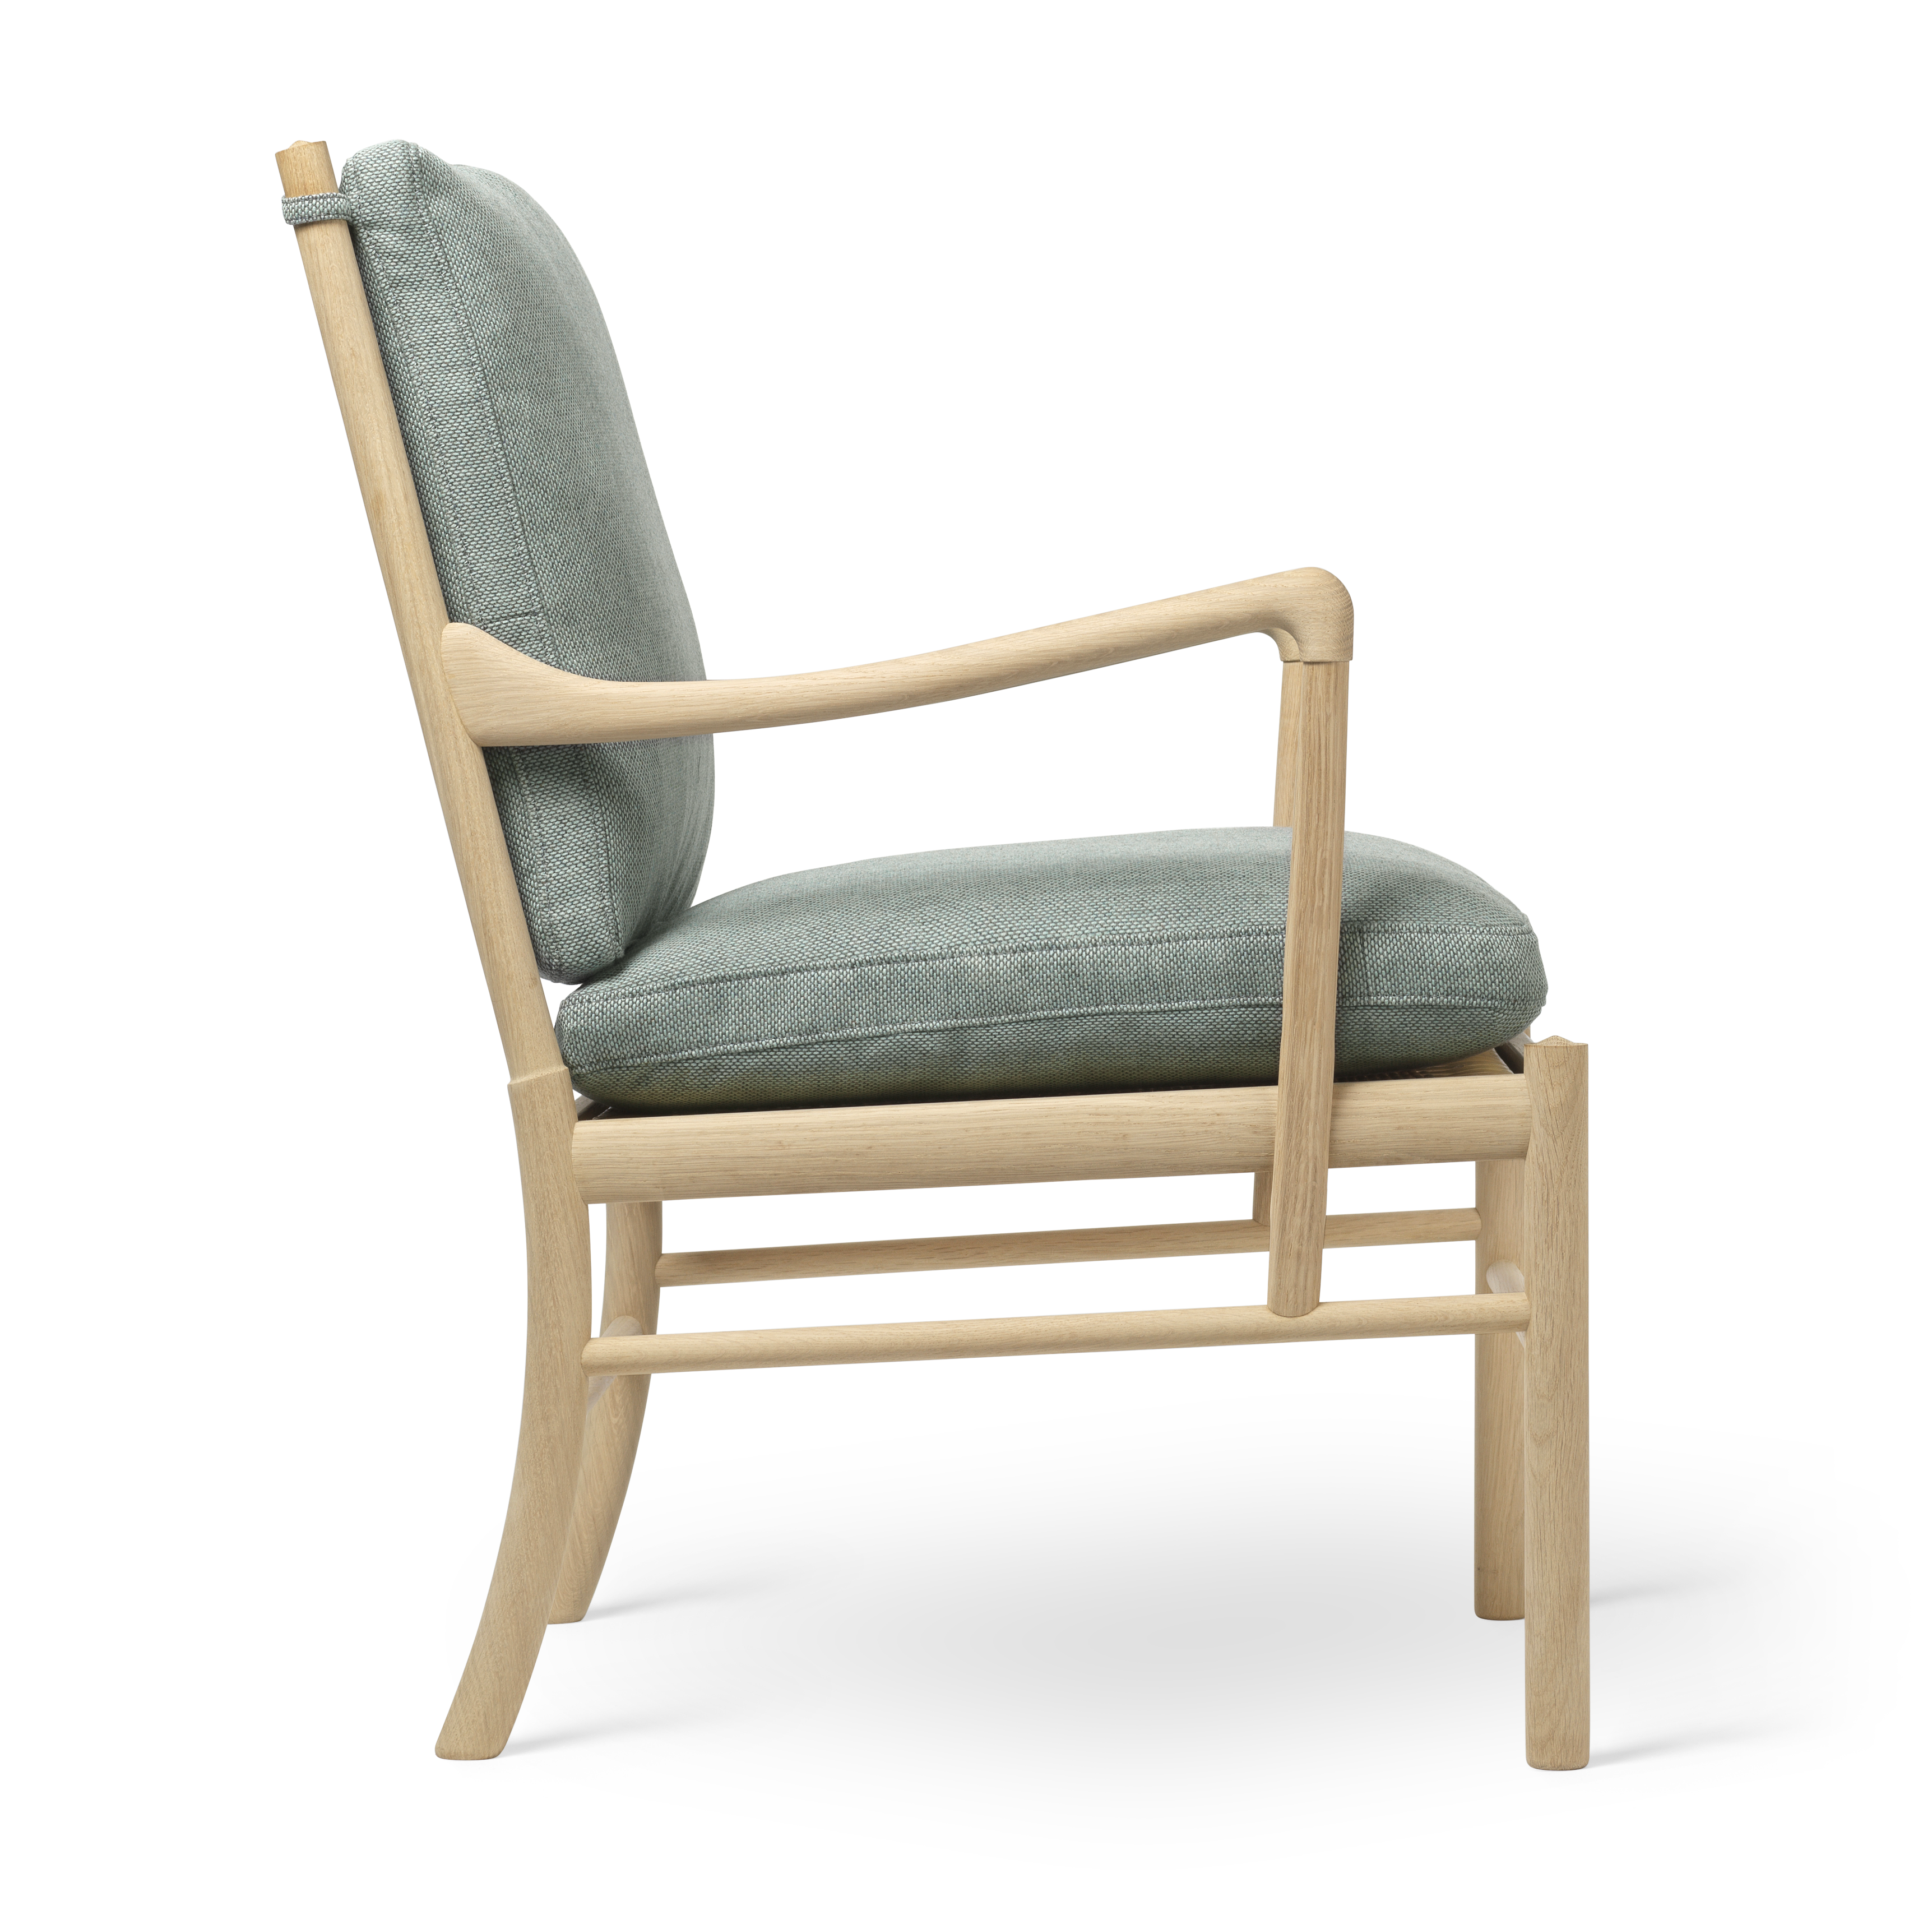 Ow149 Colonial Chair By Ole Wanscher, Colonial Outdoor Furniture